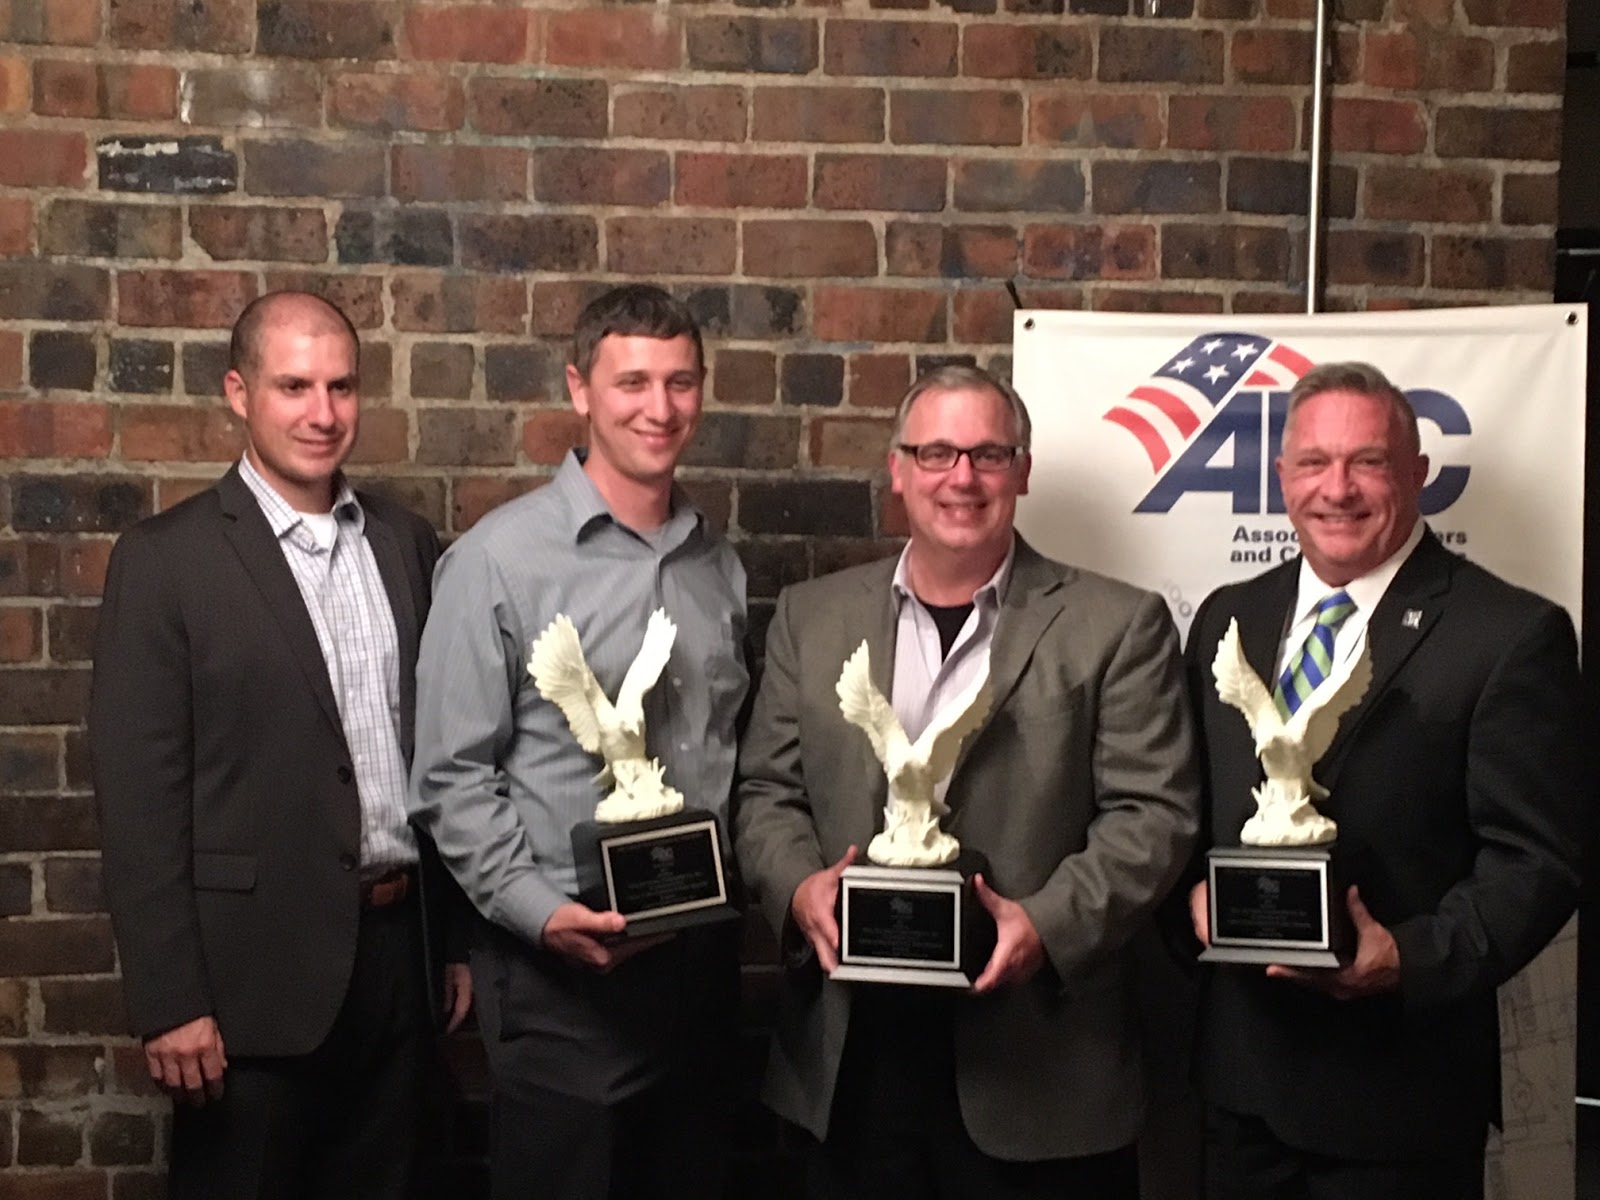 2017 Contractor of the Year Awards - Monday, Oct. 23, 2017